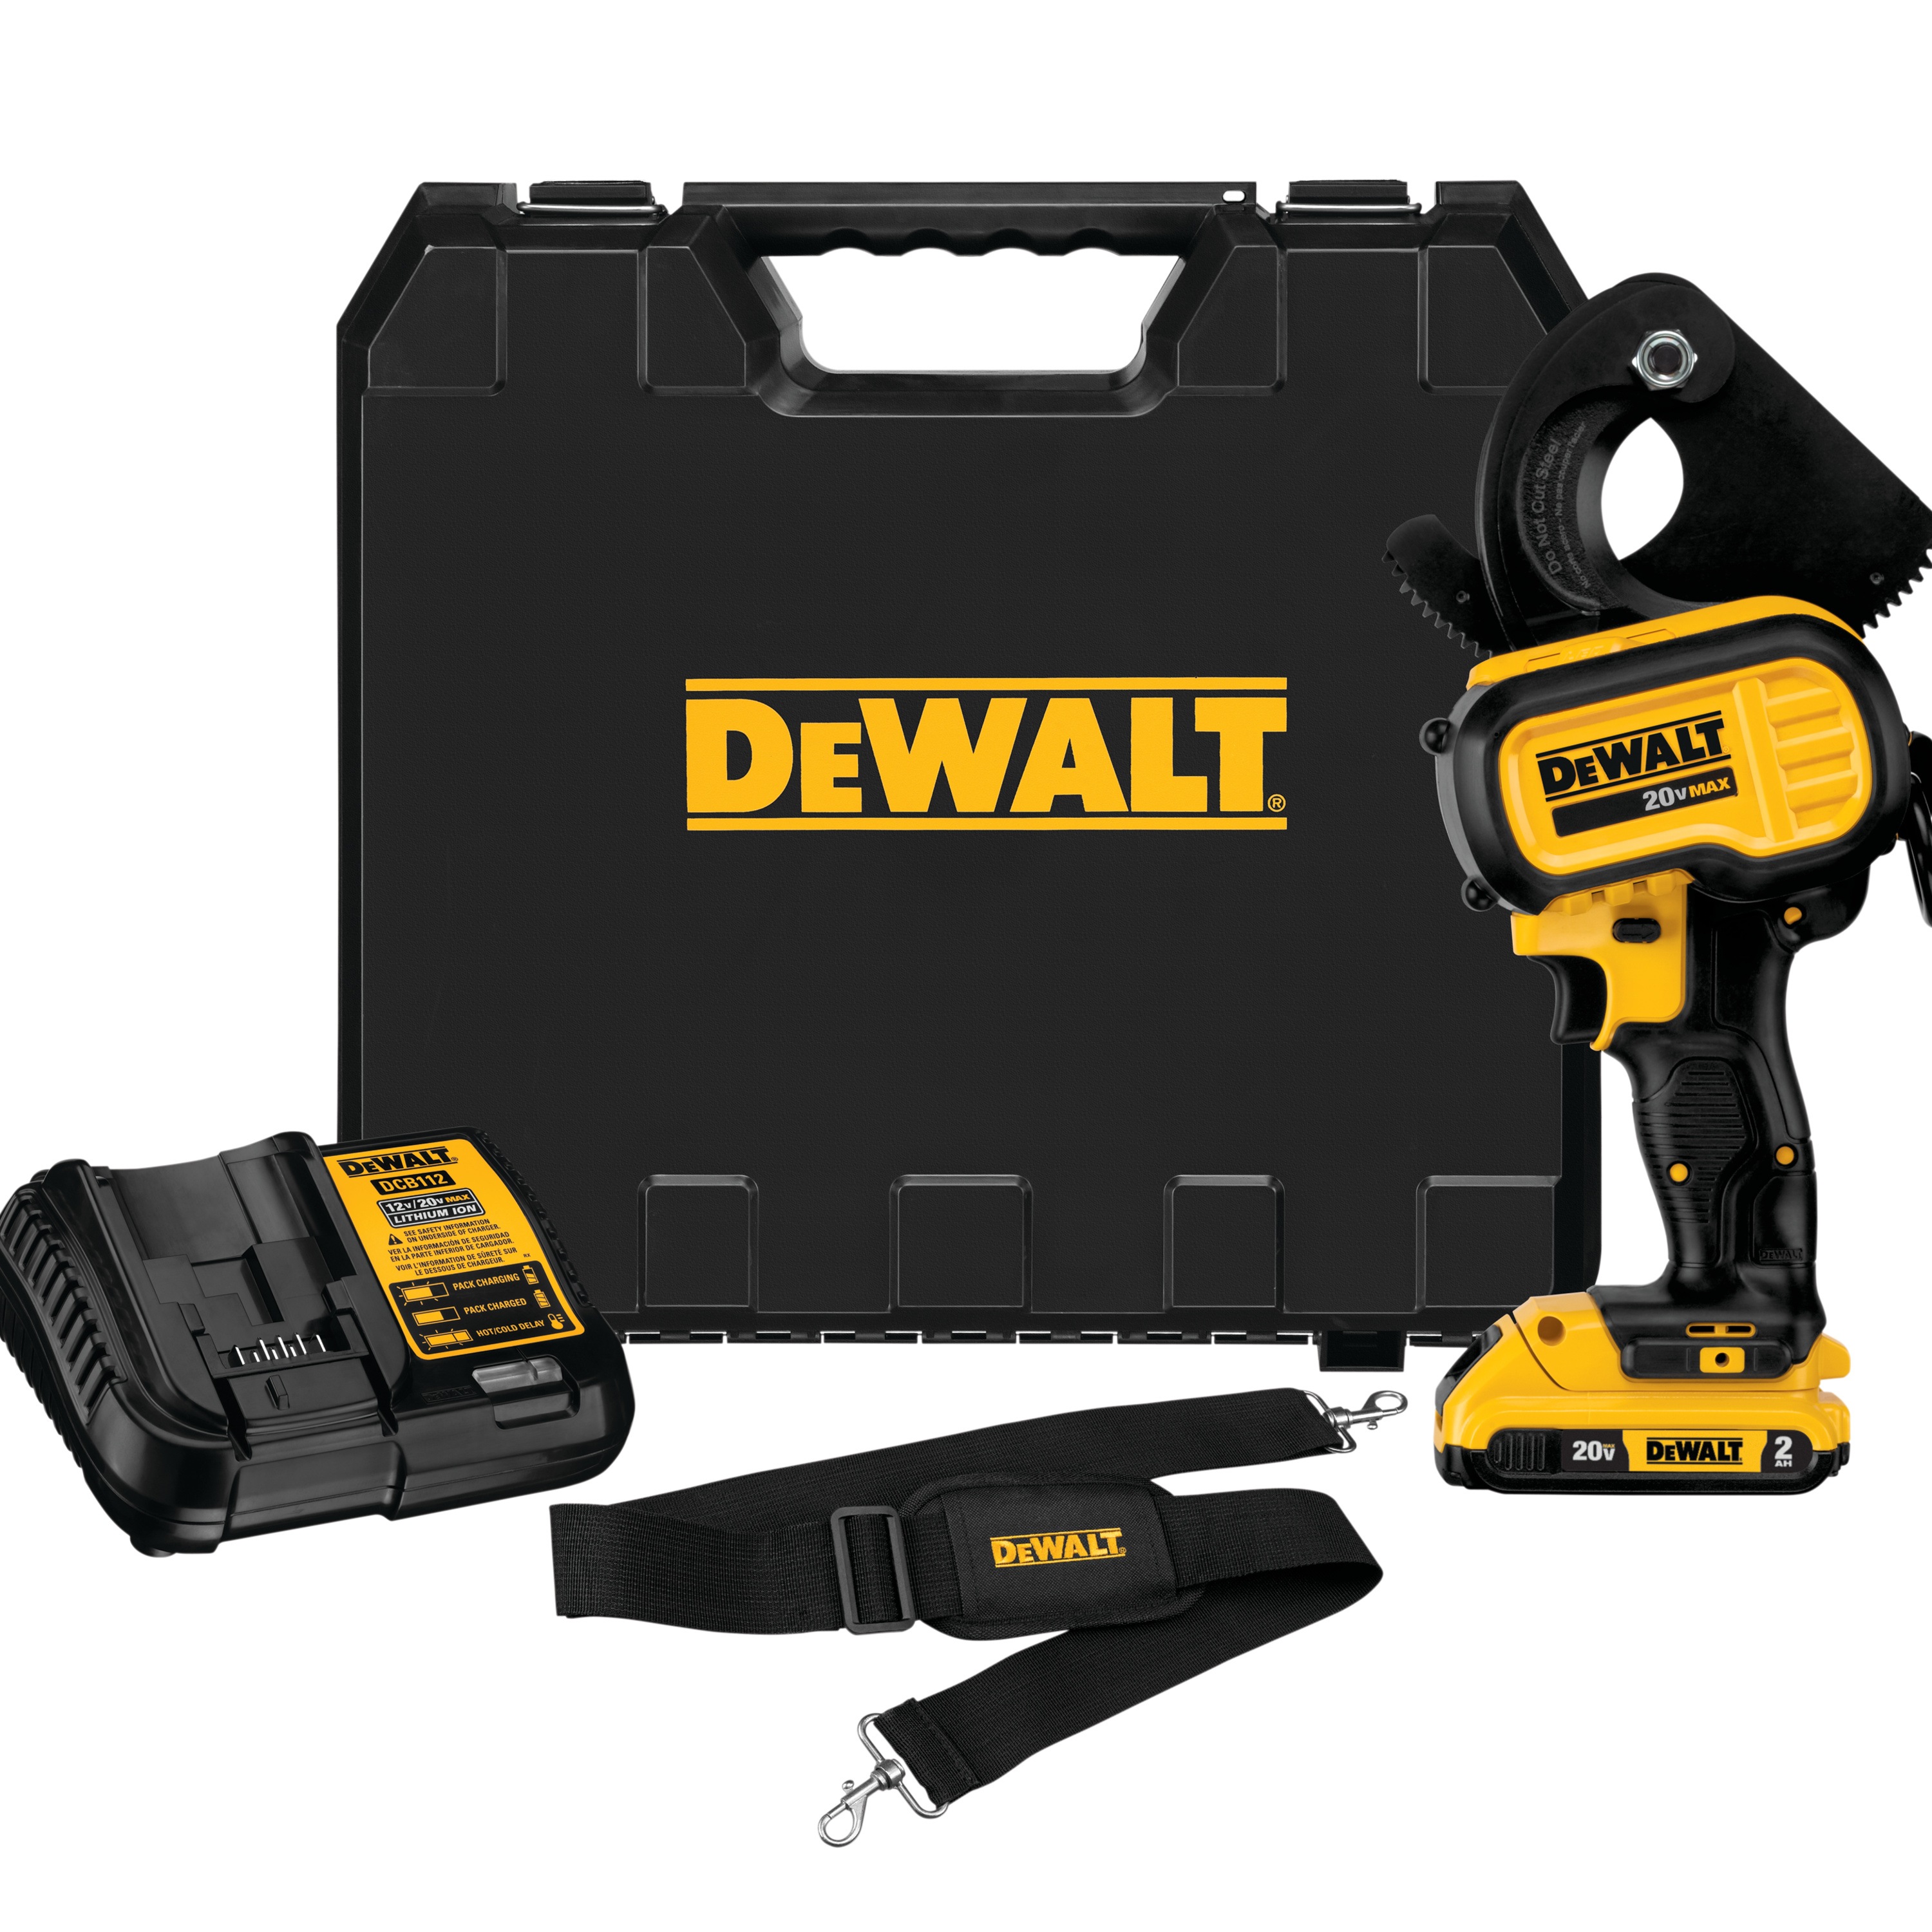 DEWALT - 20V MAX Cable Cutting Tool Kit - DCE150D1